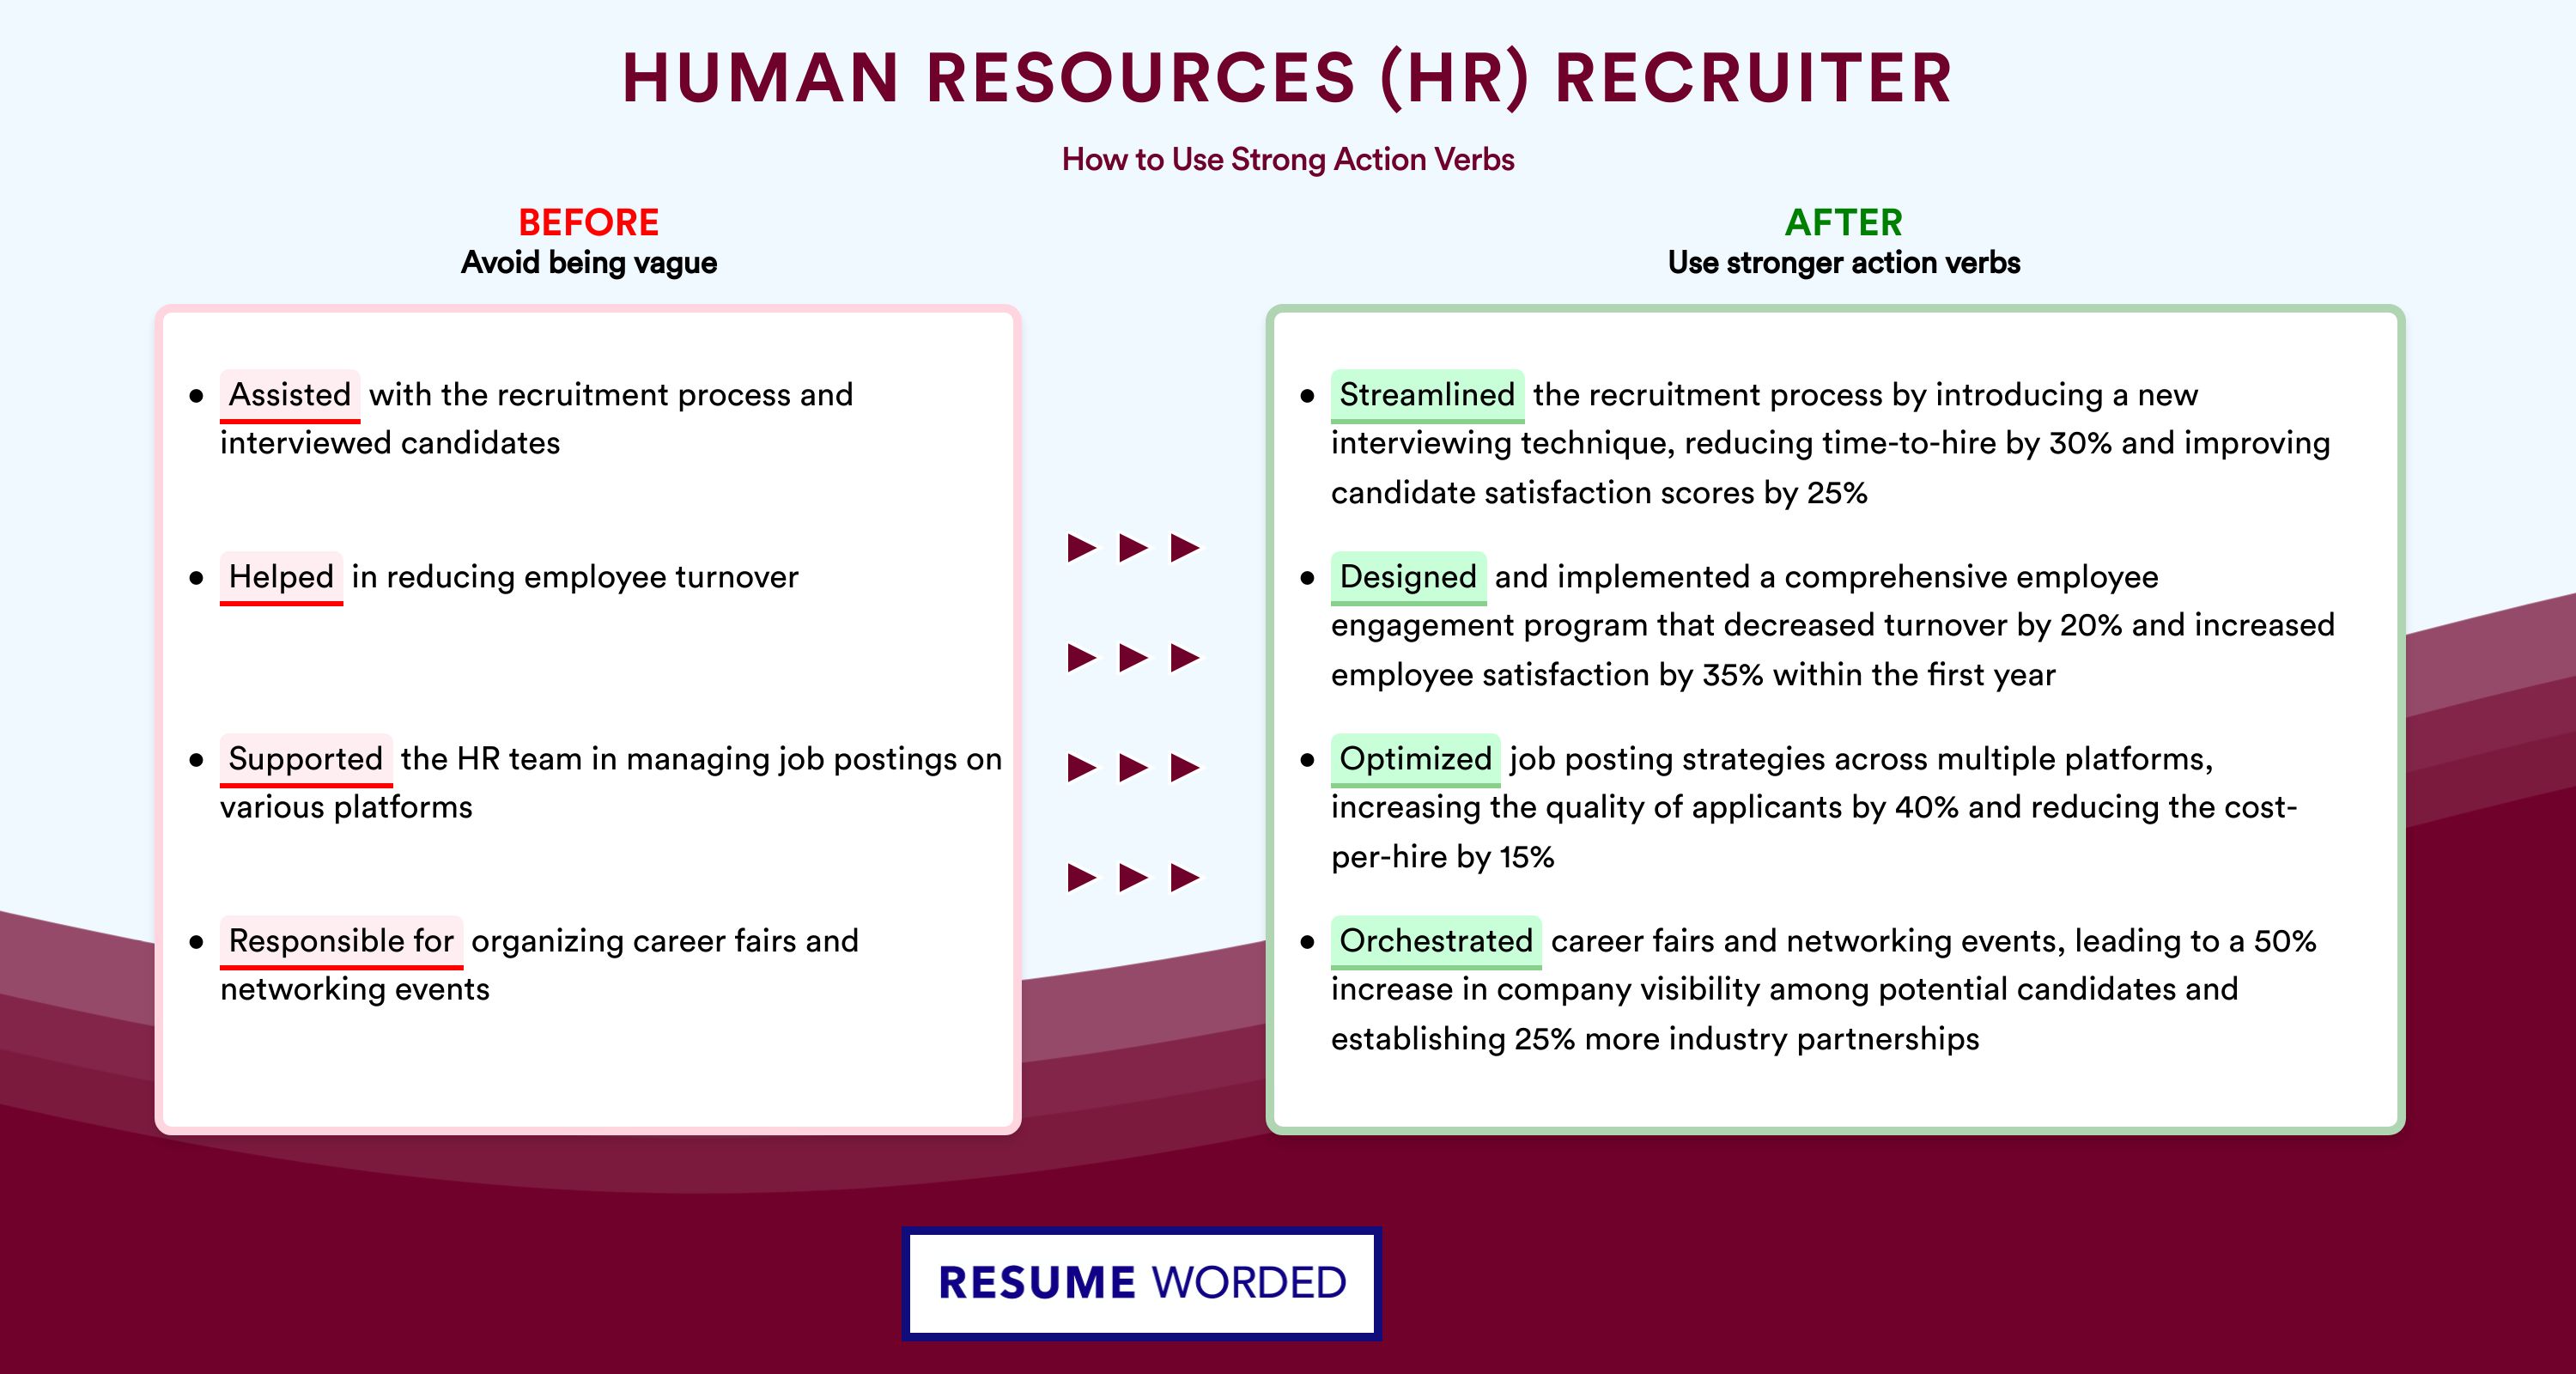 Action Verbs for Human Resources (HR) Recruiter